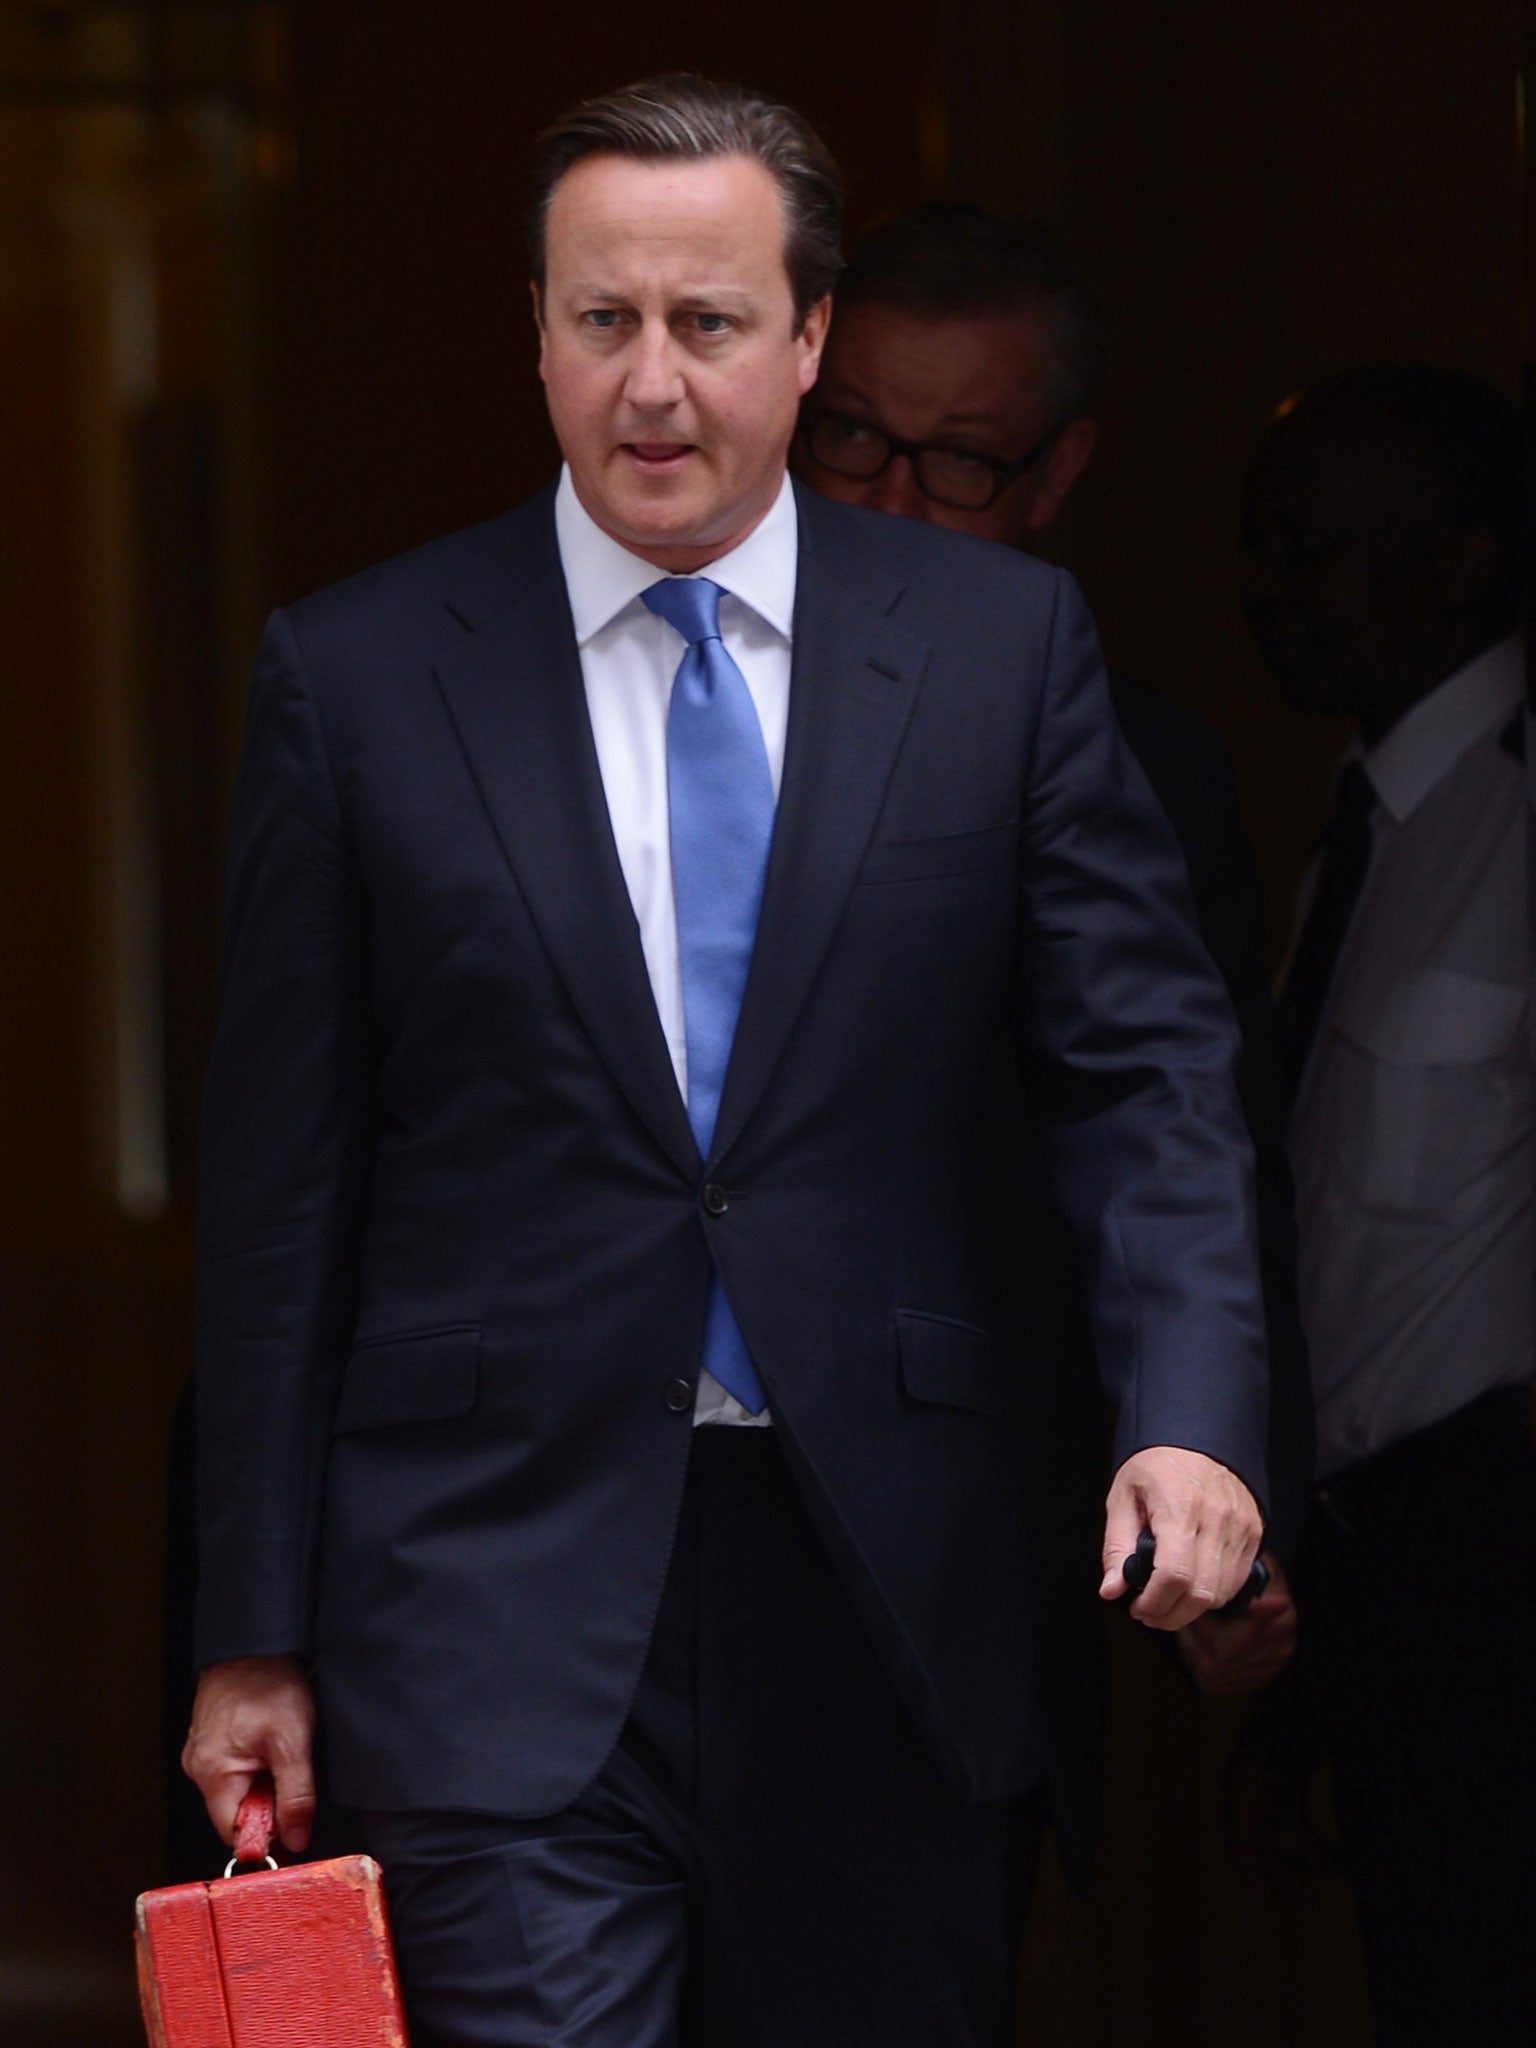 David Cameron has not ruled out returning to Parliament